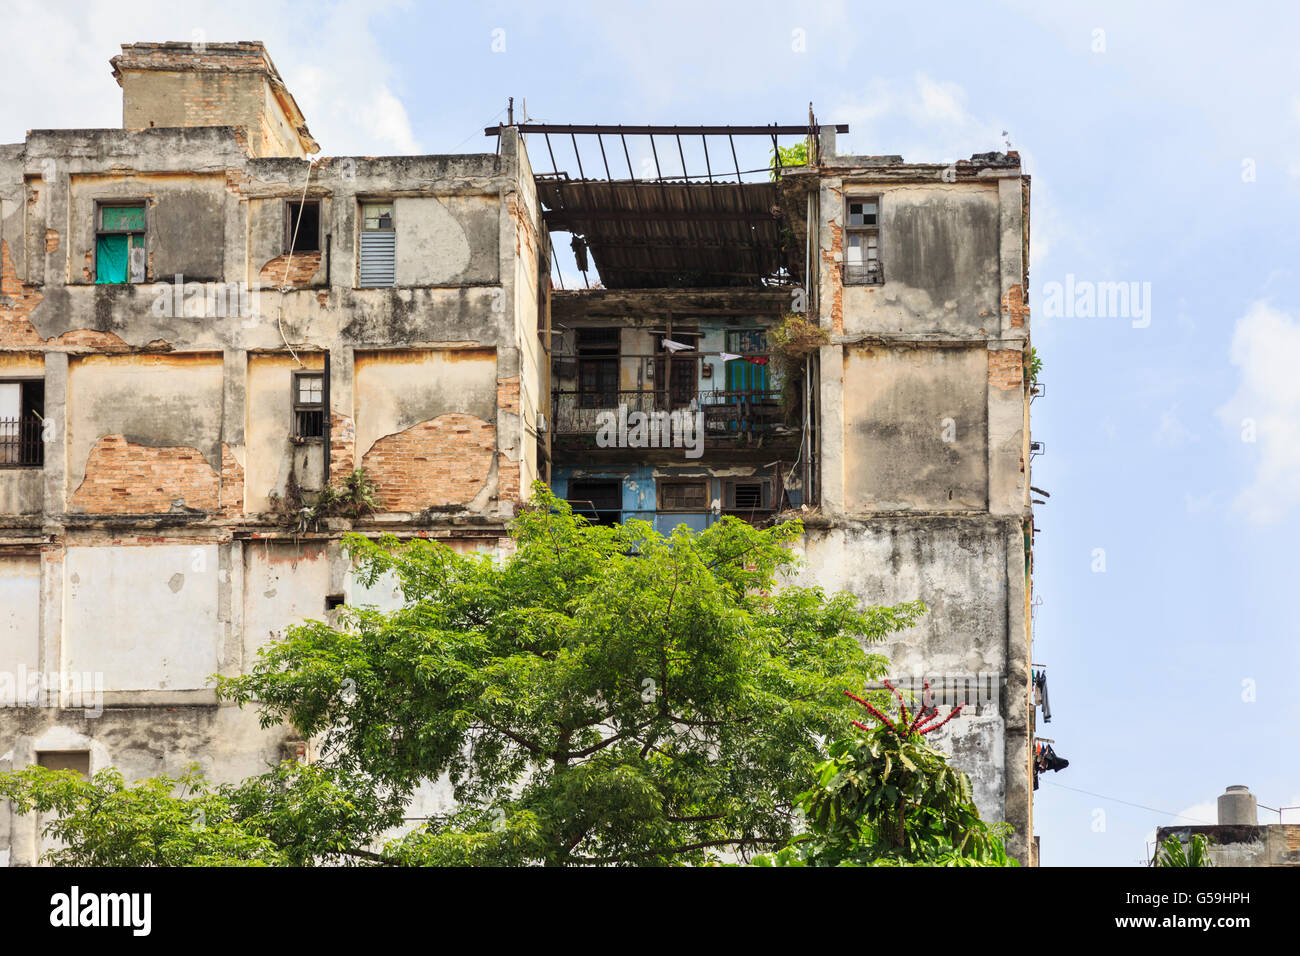 Havana architecture - dilapidated but inhabited building in the Centro district, Cuba Stock Photo